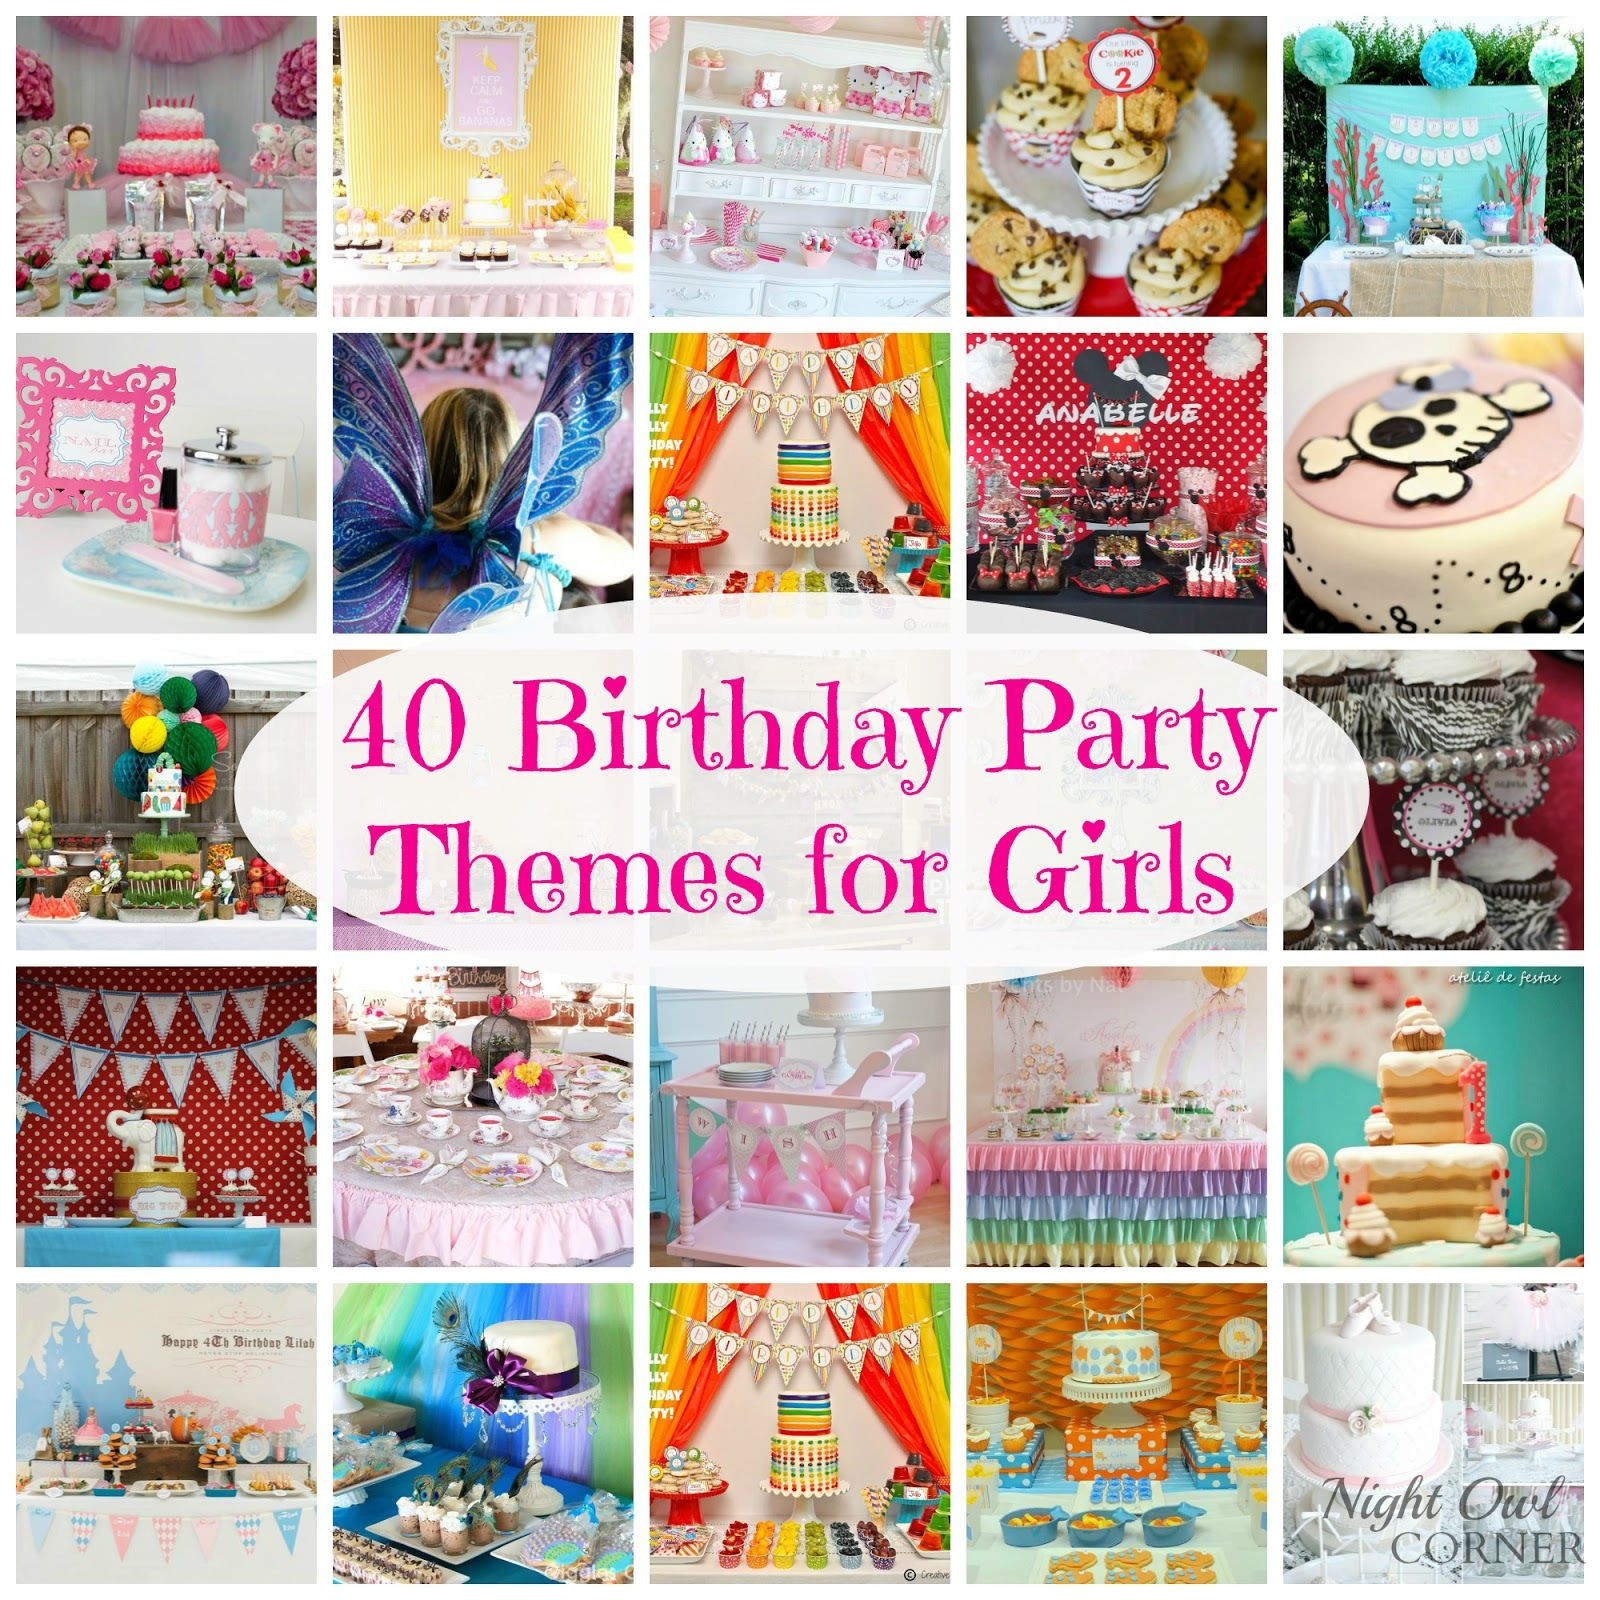 Cool 40Th Birthday Party Ideas
 Night Owl Corner 40 Birthday Party Themes for Girls